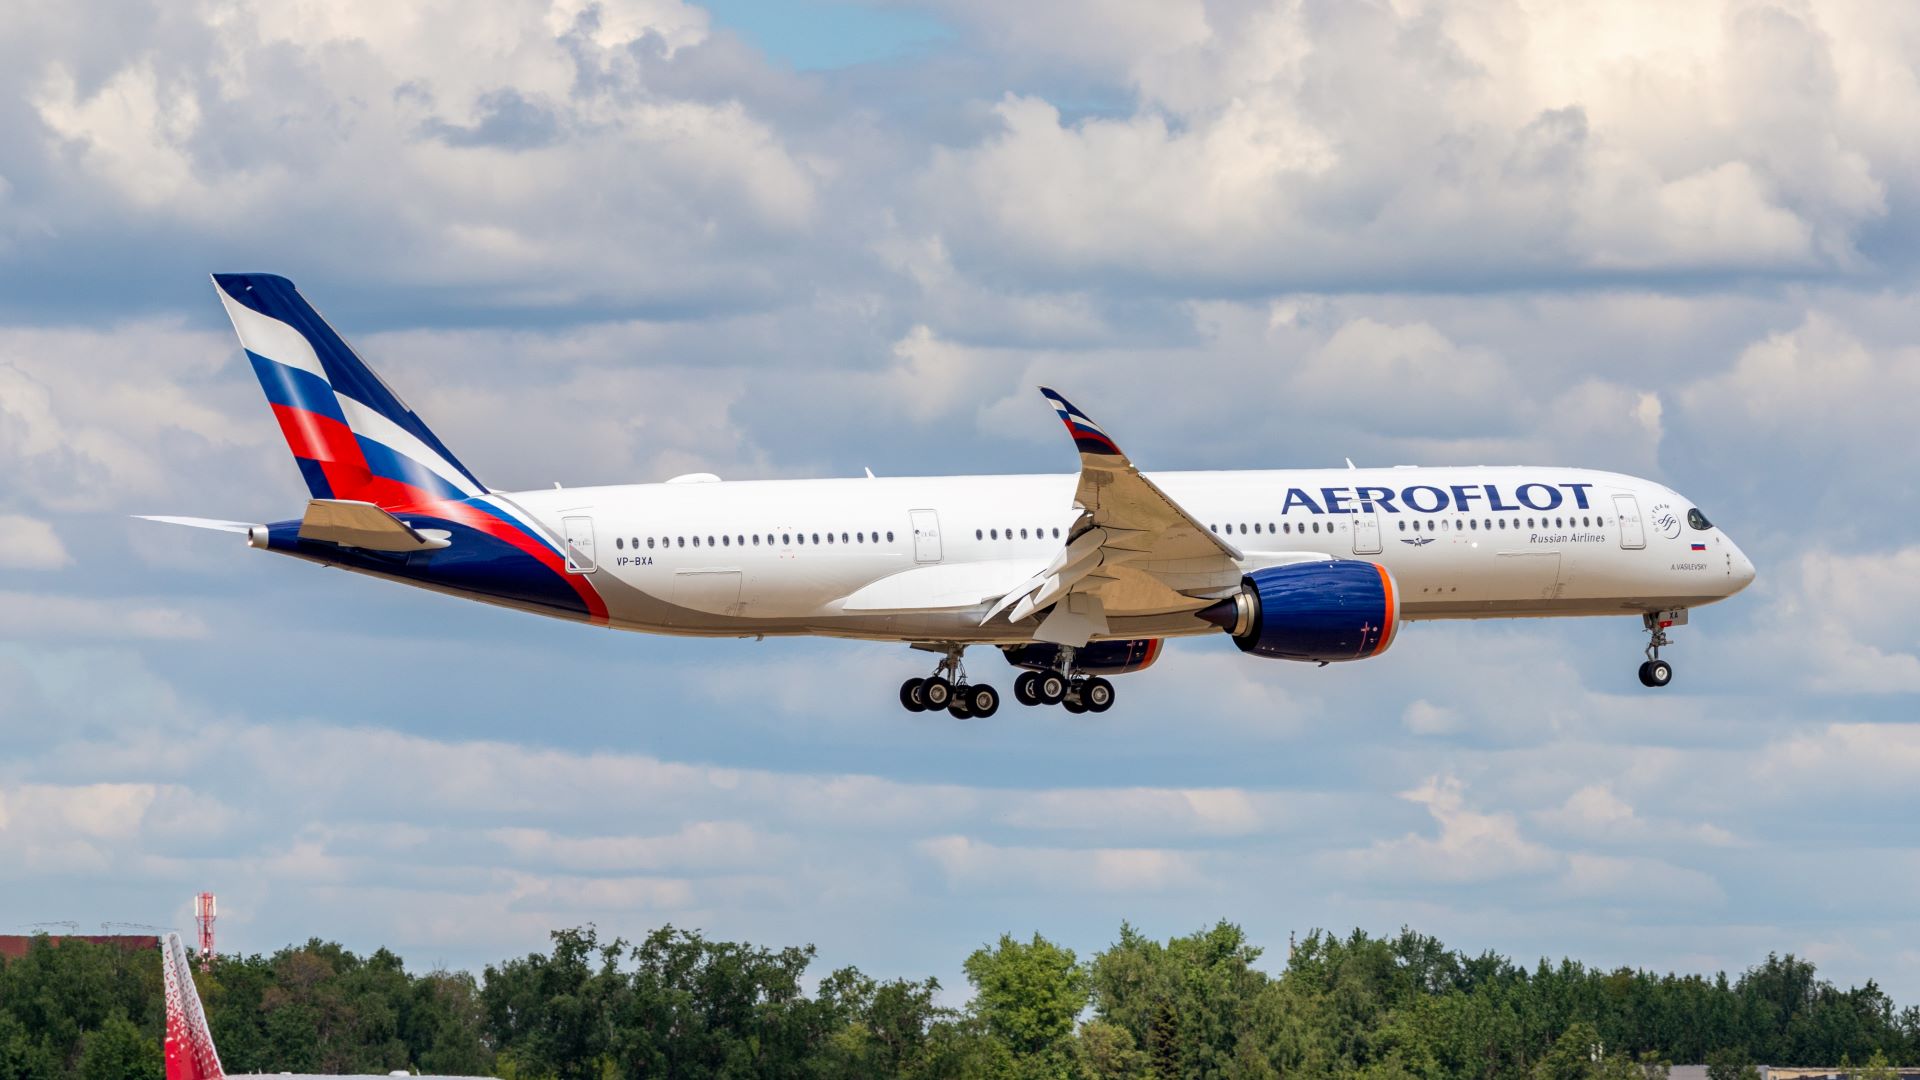 A white-and-blue Aeroflot plane comes in for a landing.